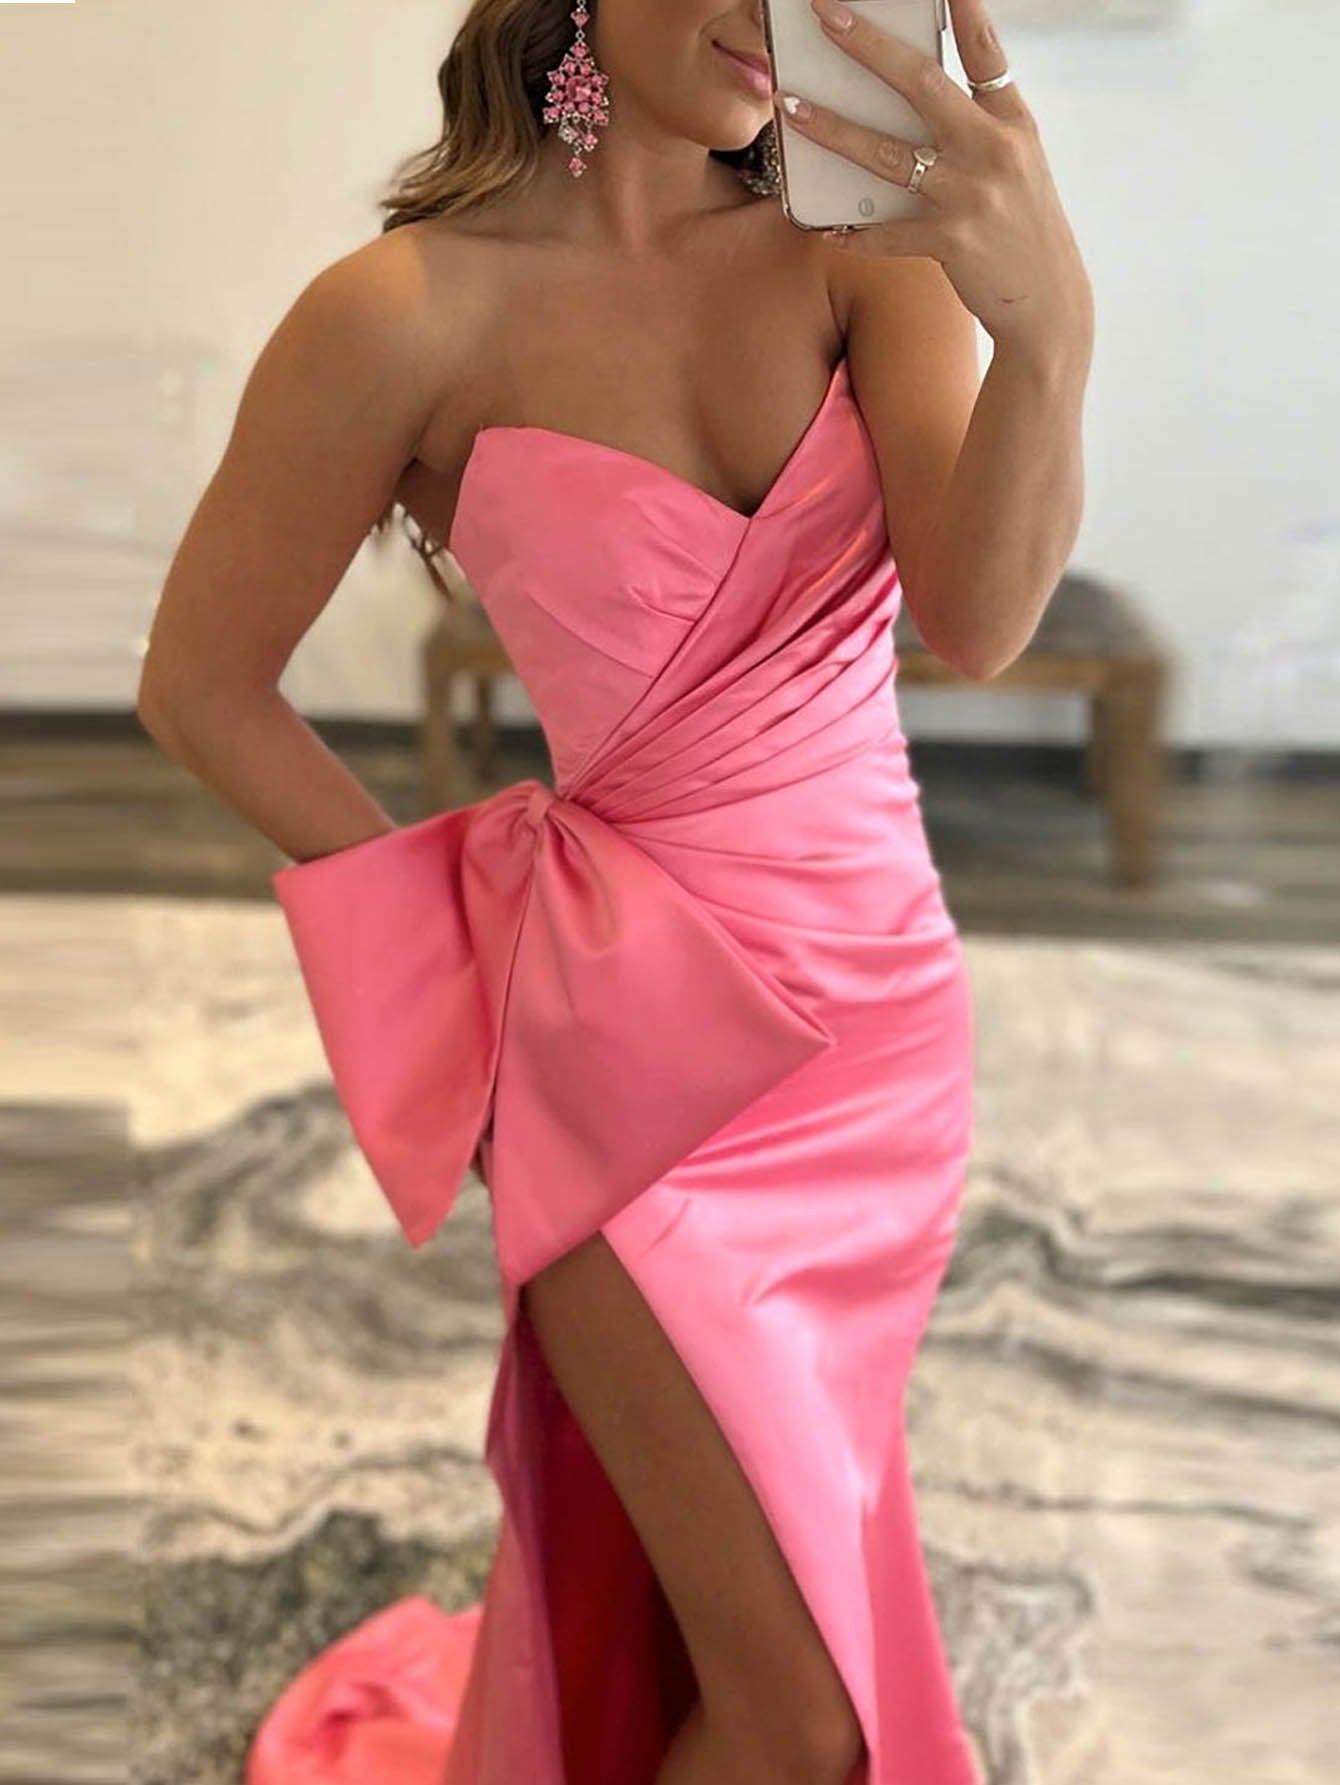 Bexley |Mermaid Strapless Long Satin Prom Dress with bow tie